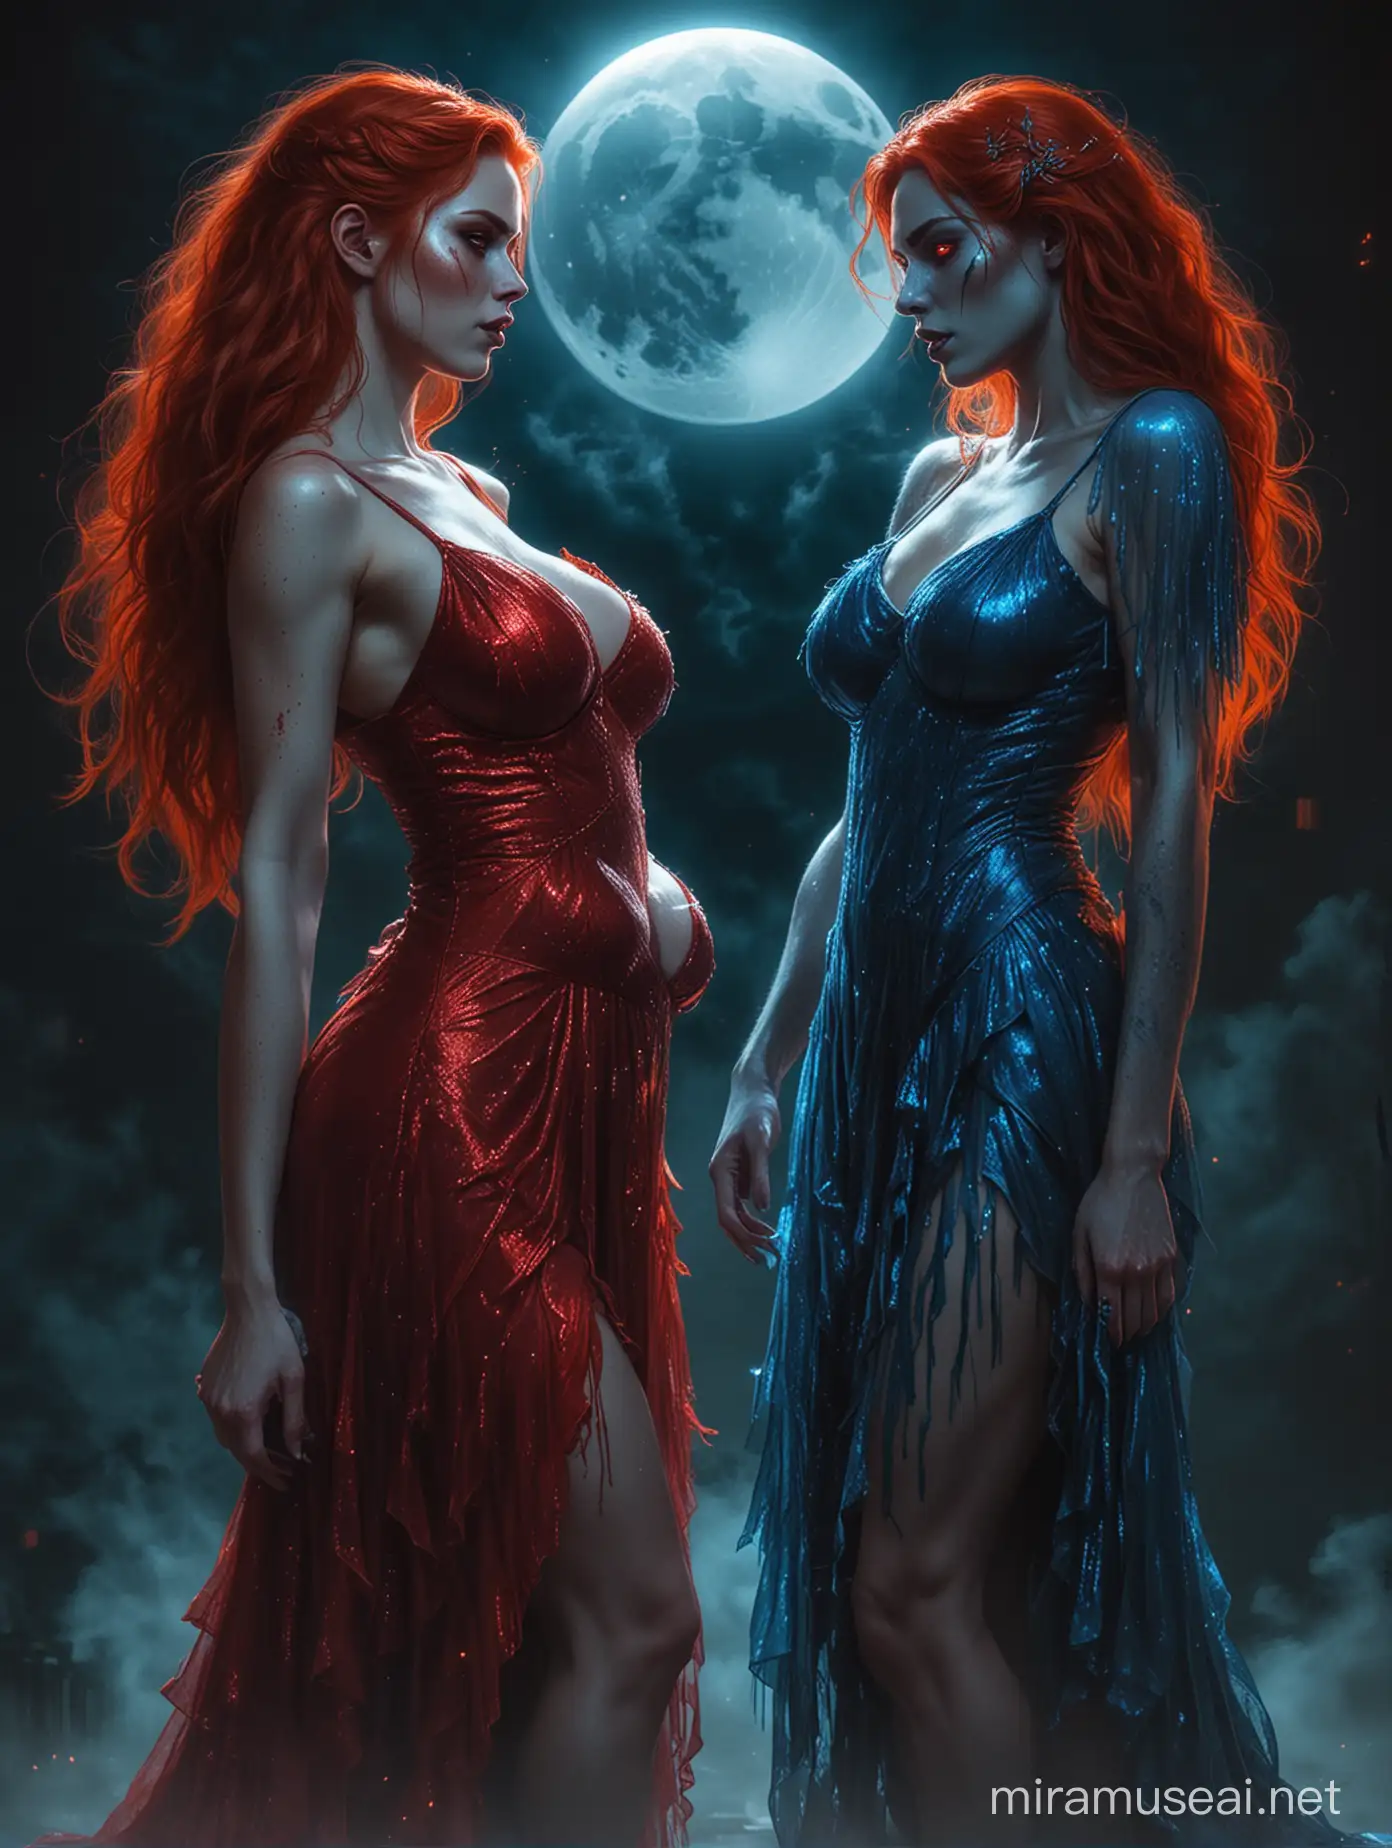 Glowing Red and Blue Goddesses Confront a Menacing Werewolf Under the Moonlight